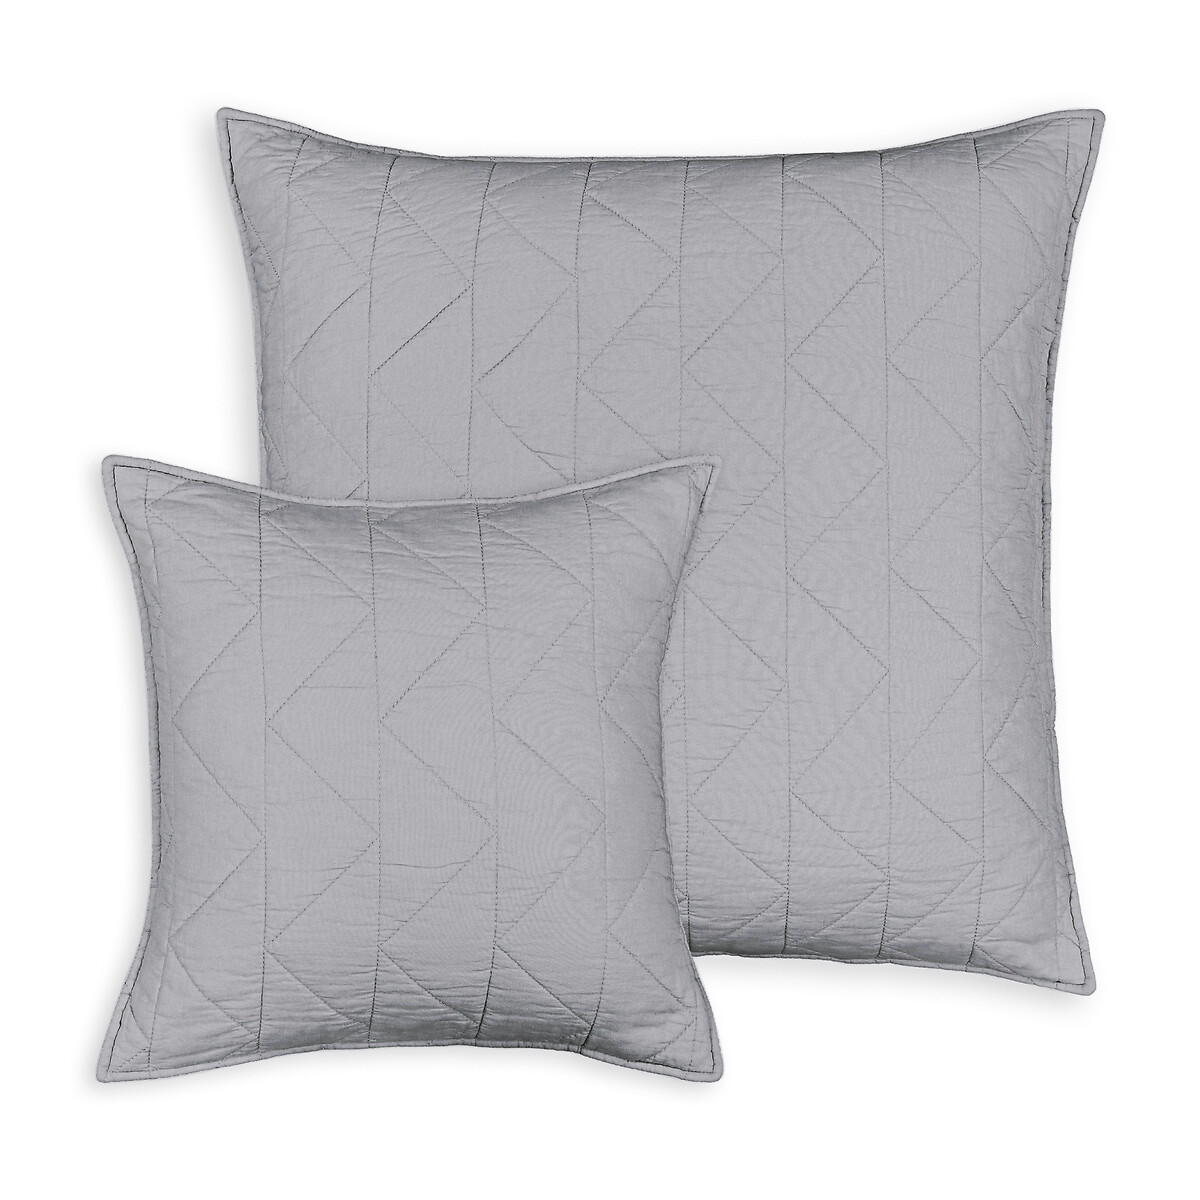 Zig Zag Scenario Quilted Cushion Cover